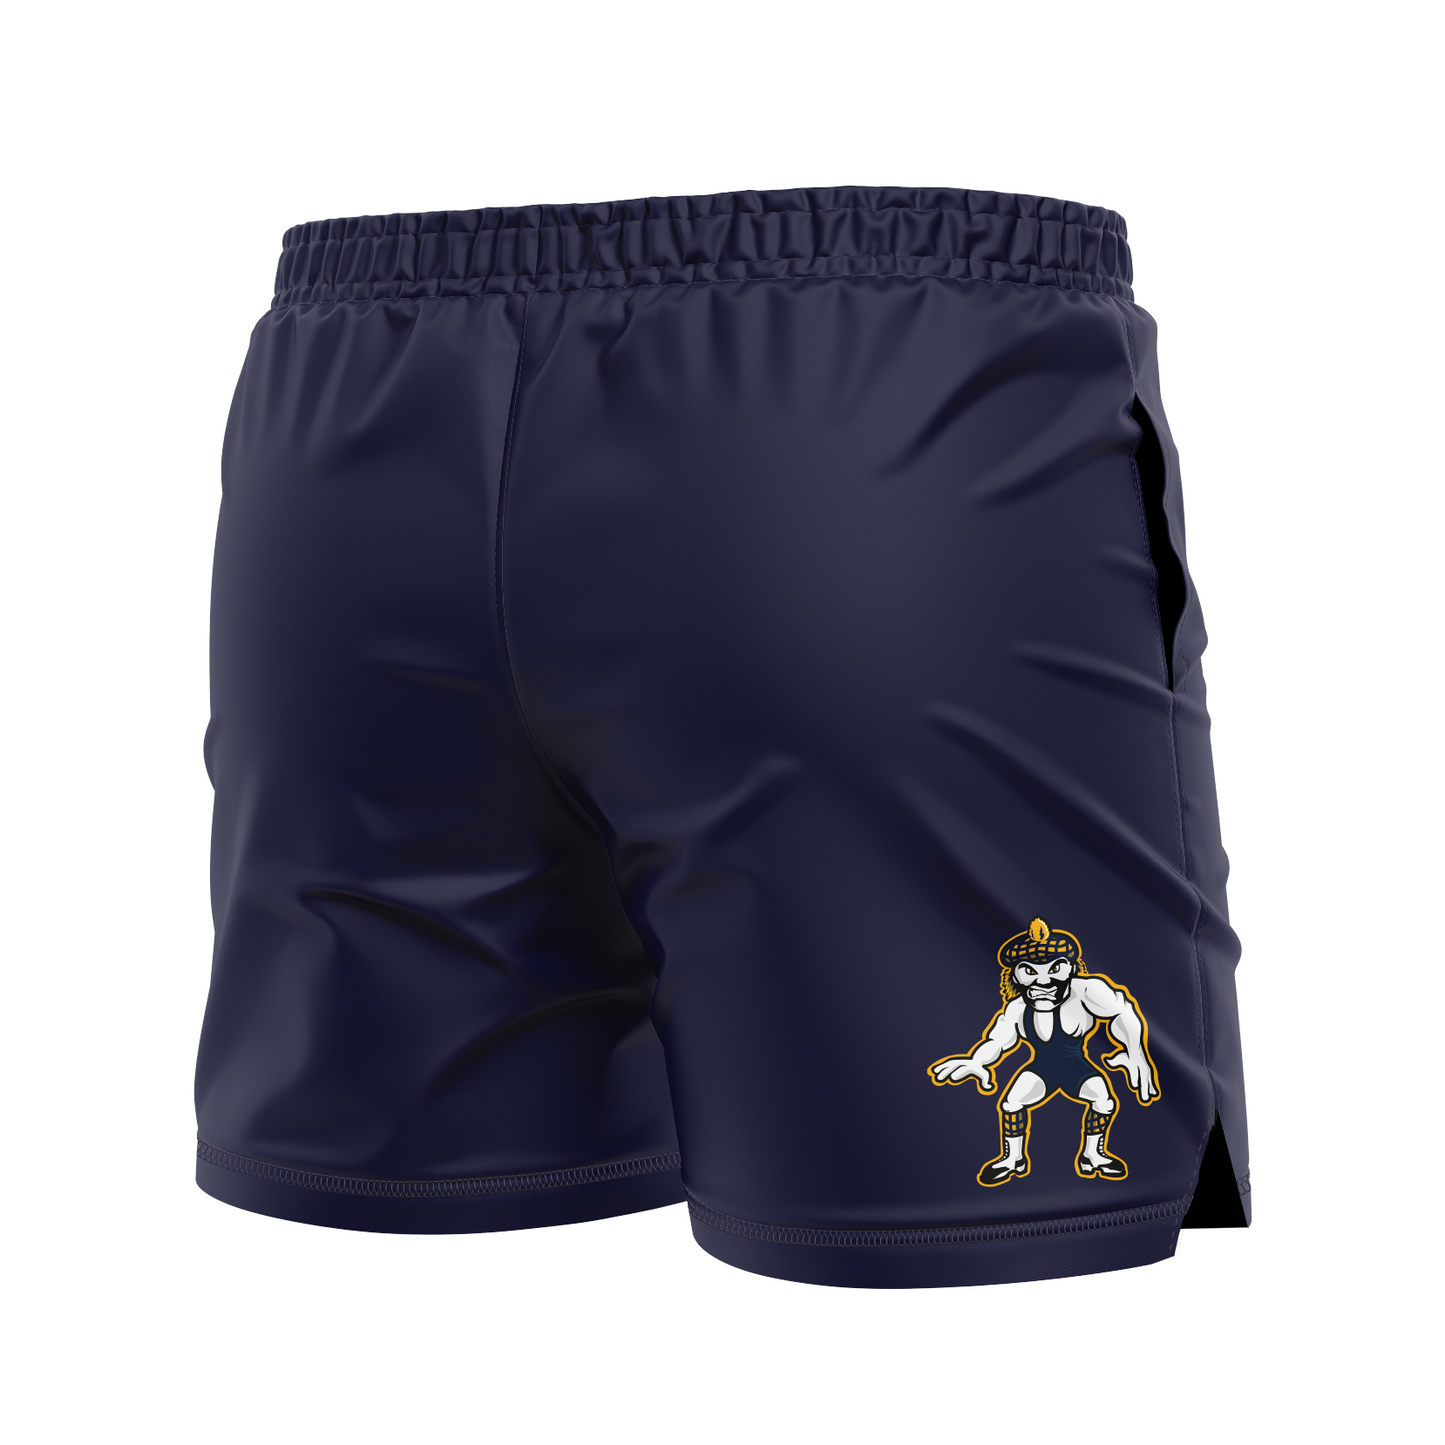 Scots Wrestling Club FC shorts Standard Issue, athl. gold on navy